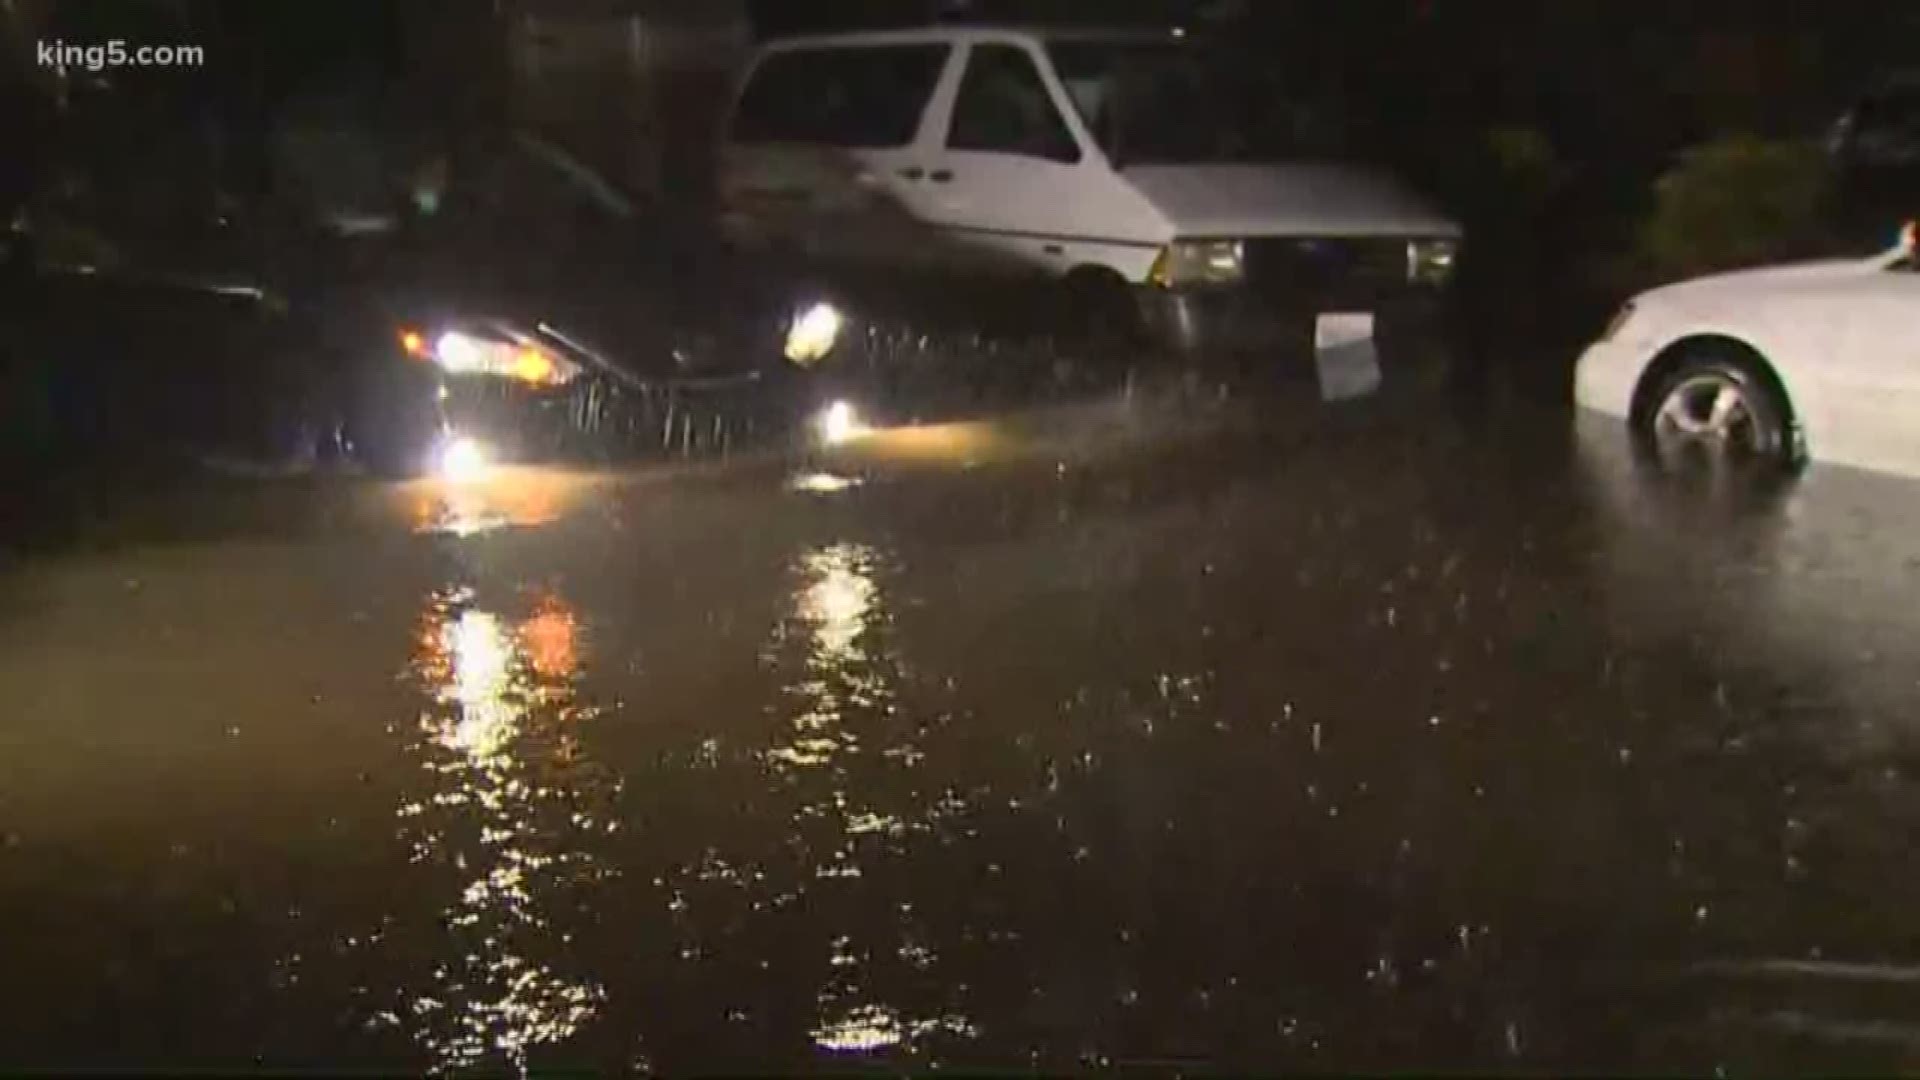 Heavy rain is causing some streets in western Washington to flood.